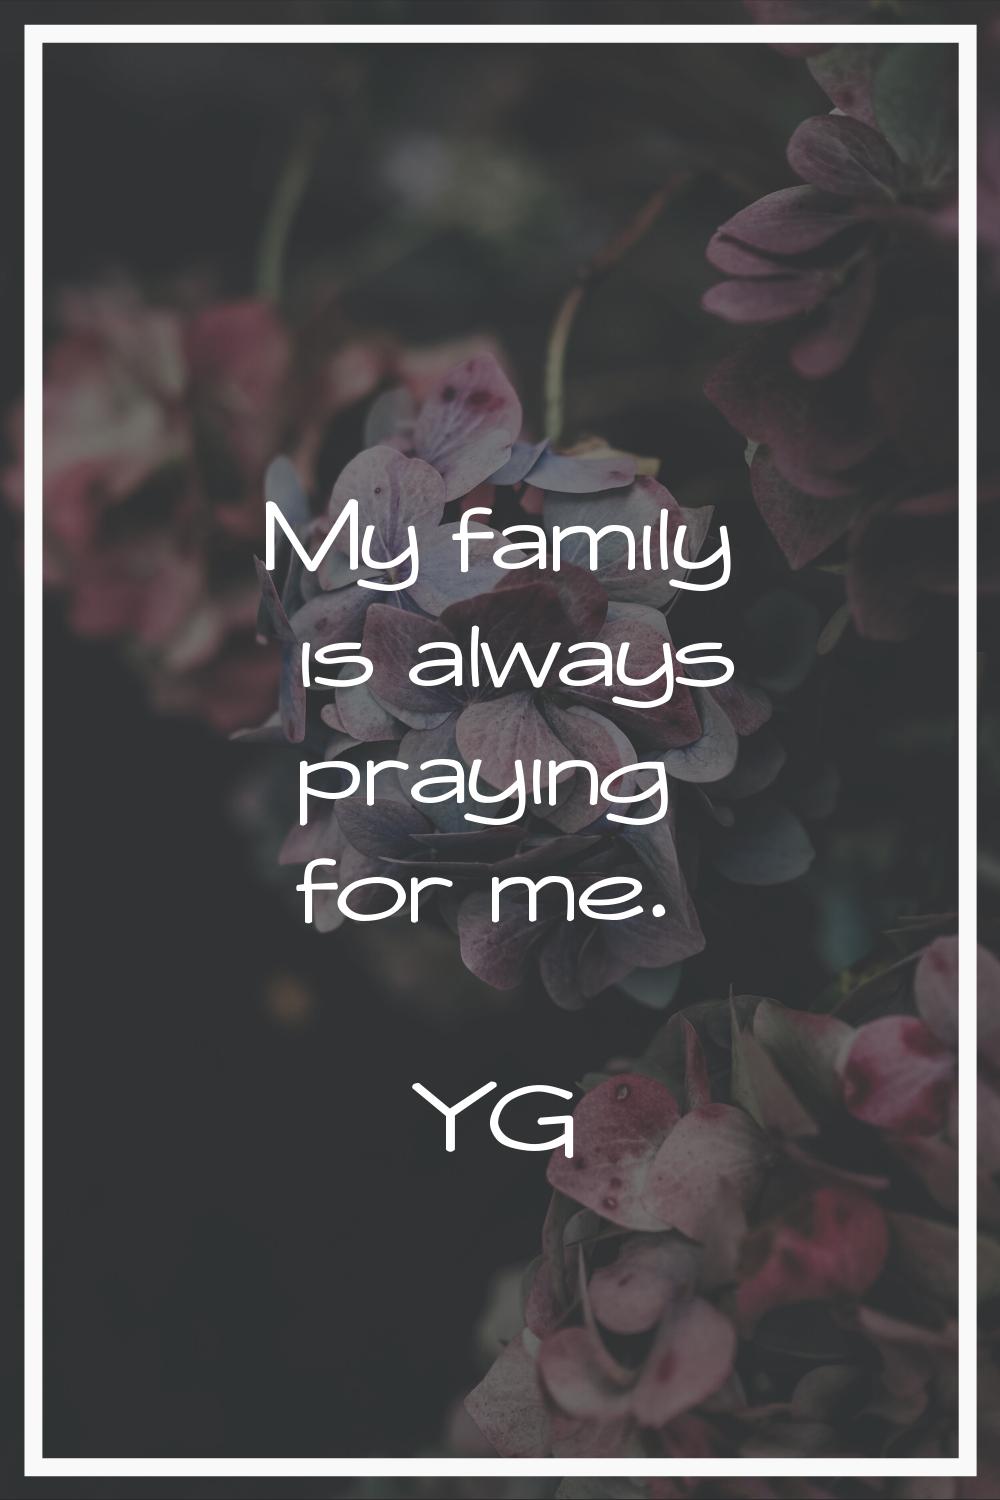 My family is always praying for me.